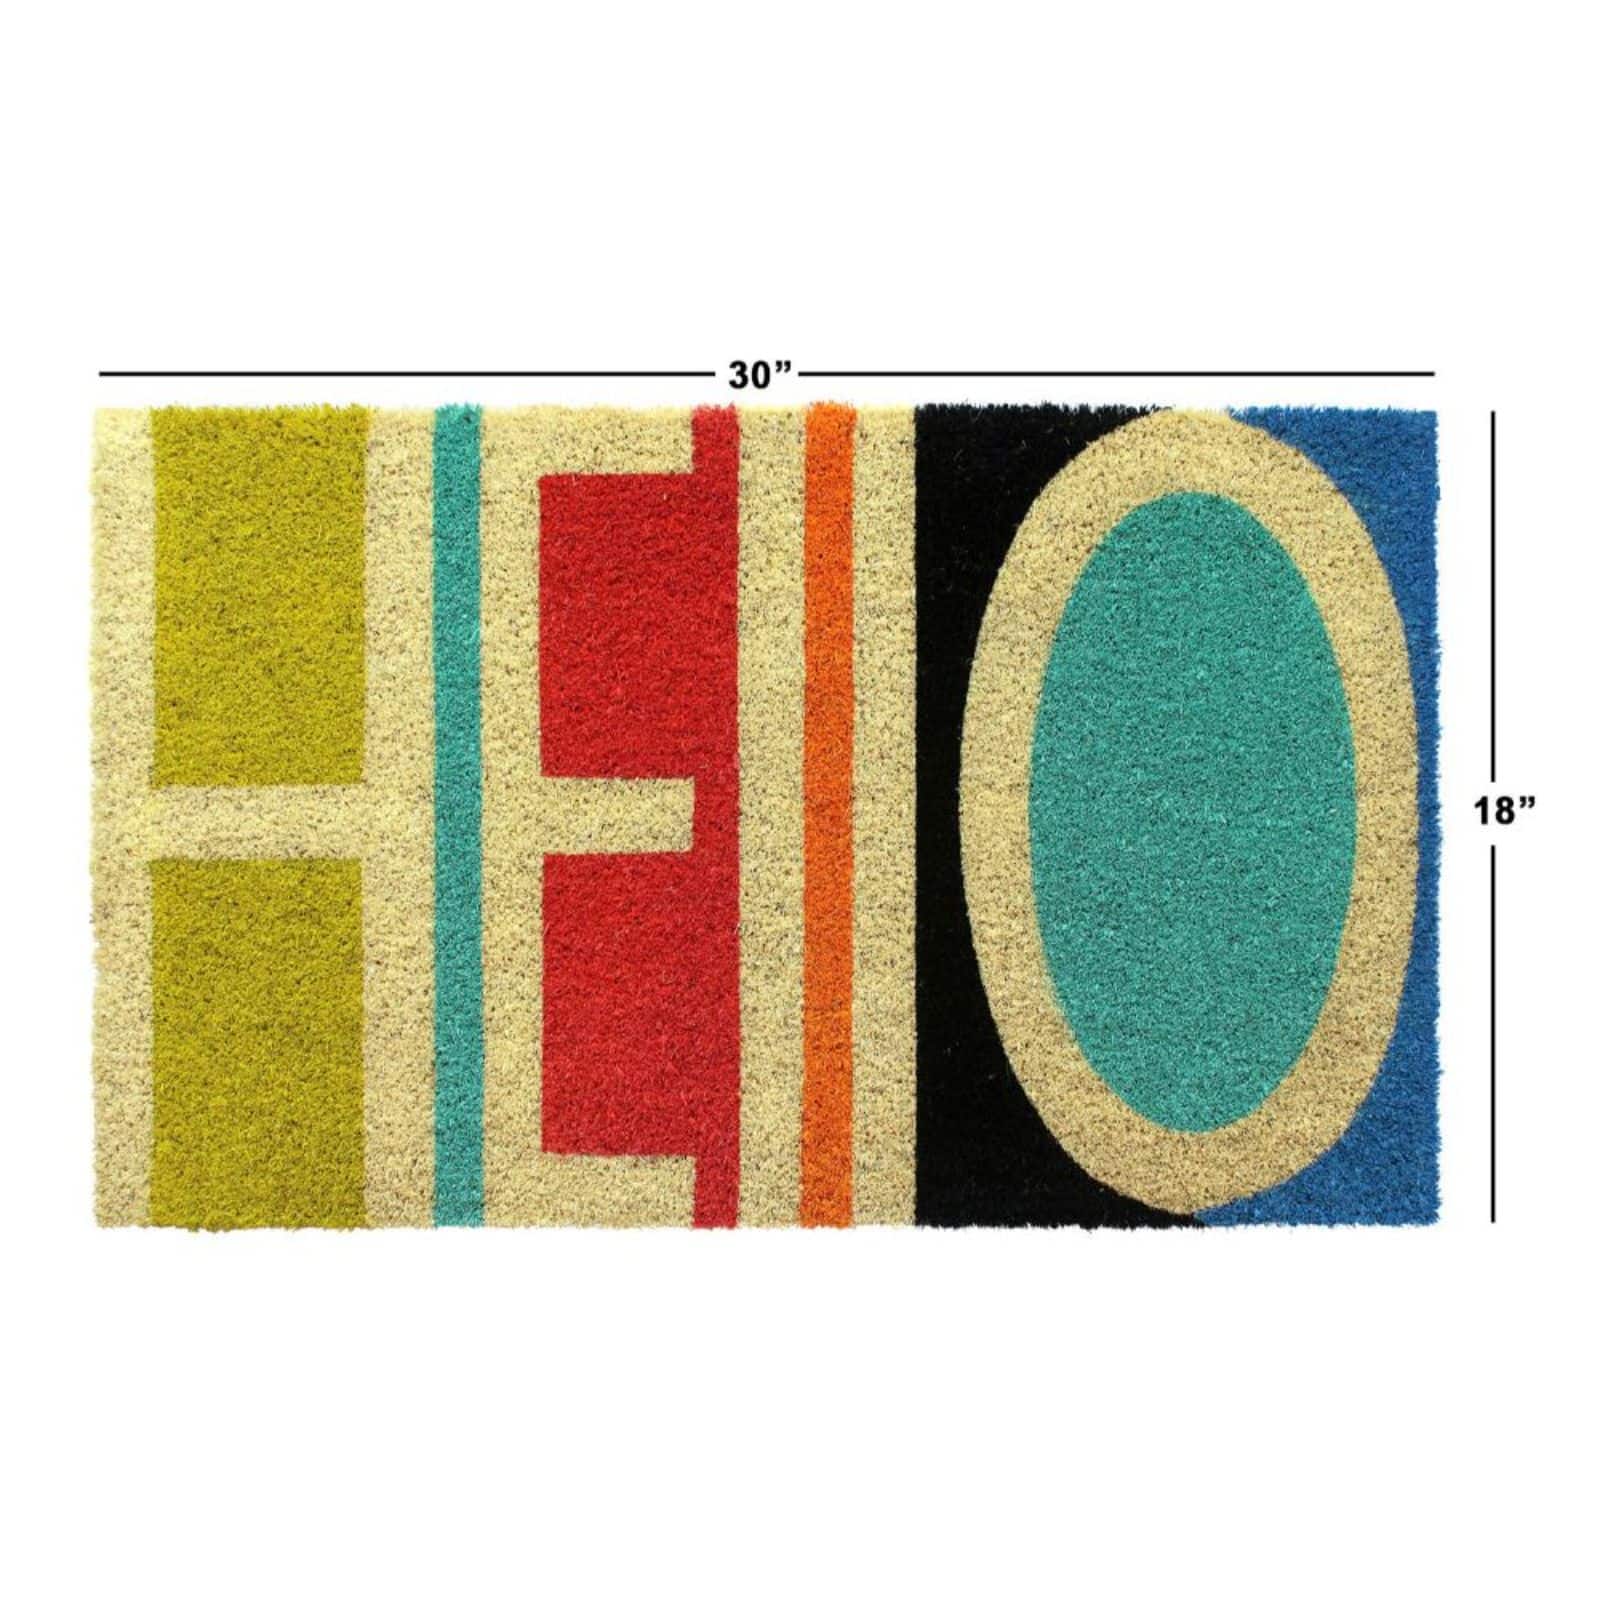 RugSmith Bleached Hello Abstract Machine Tufted Coir Doormat